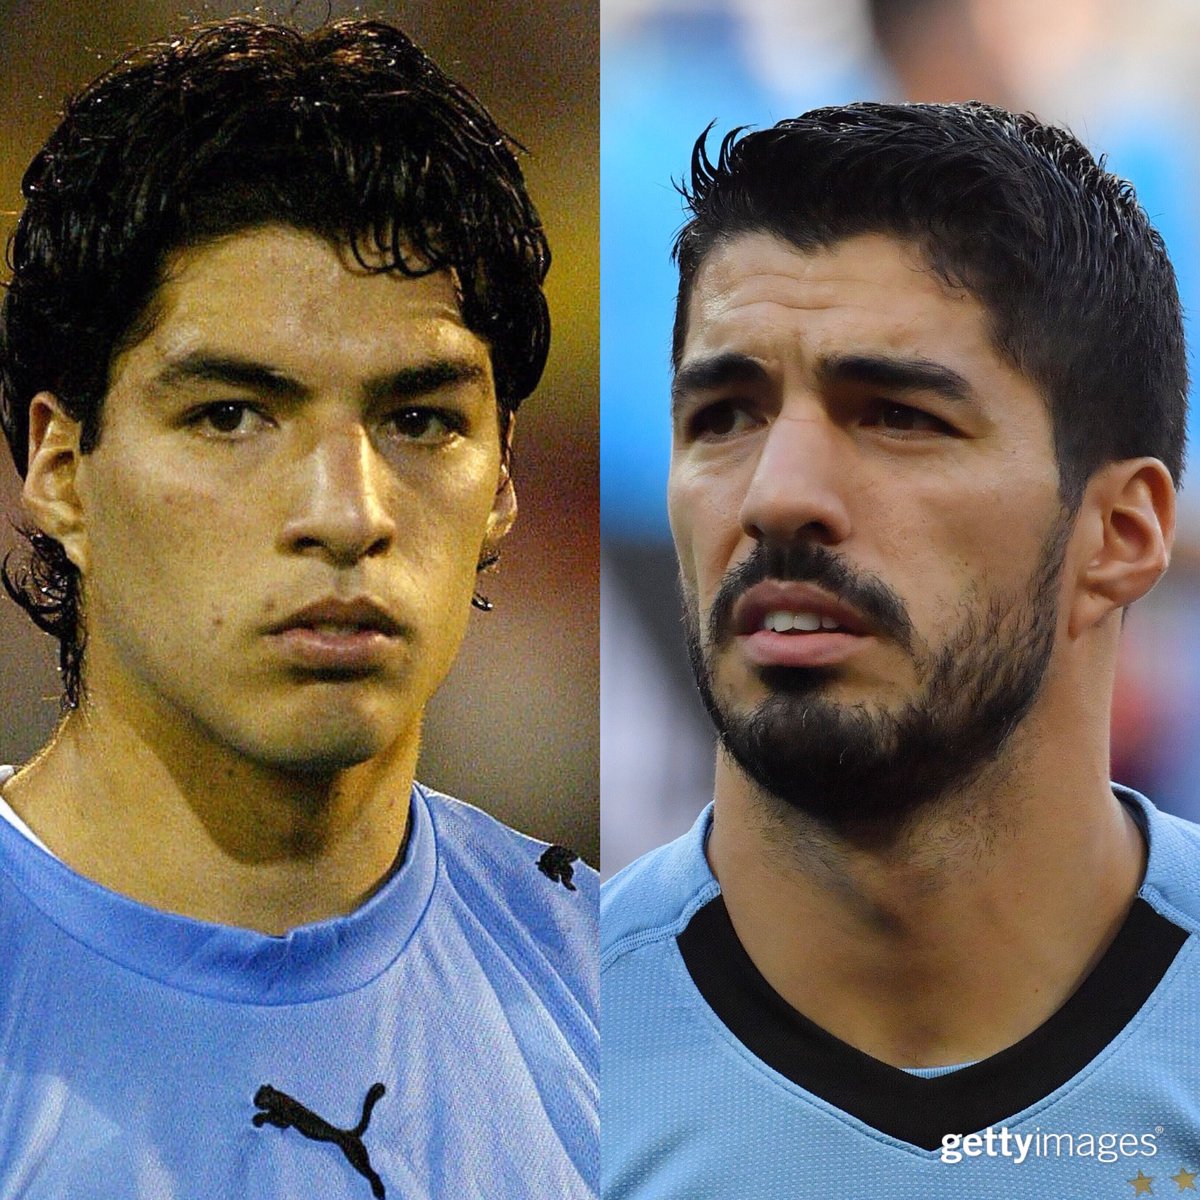 Tottenham tried to sign Luis Suárez but were told he was not up to it   Tottenham Hotspur  The Guardian